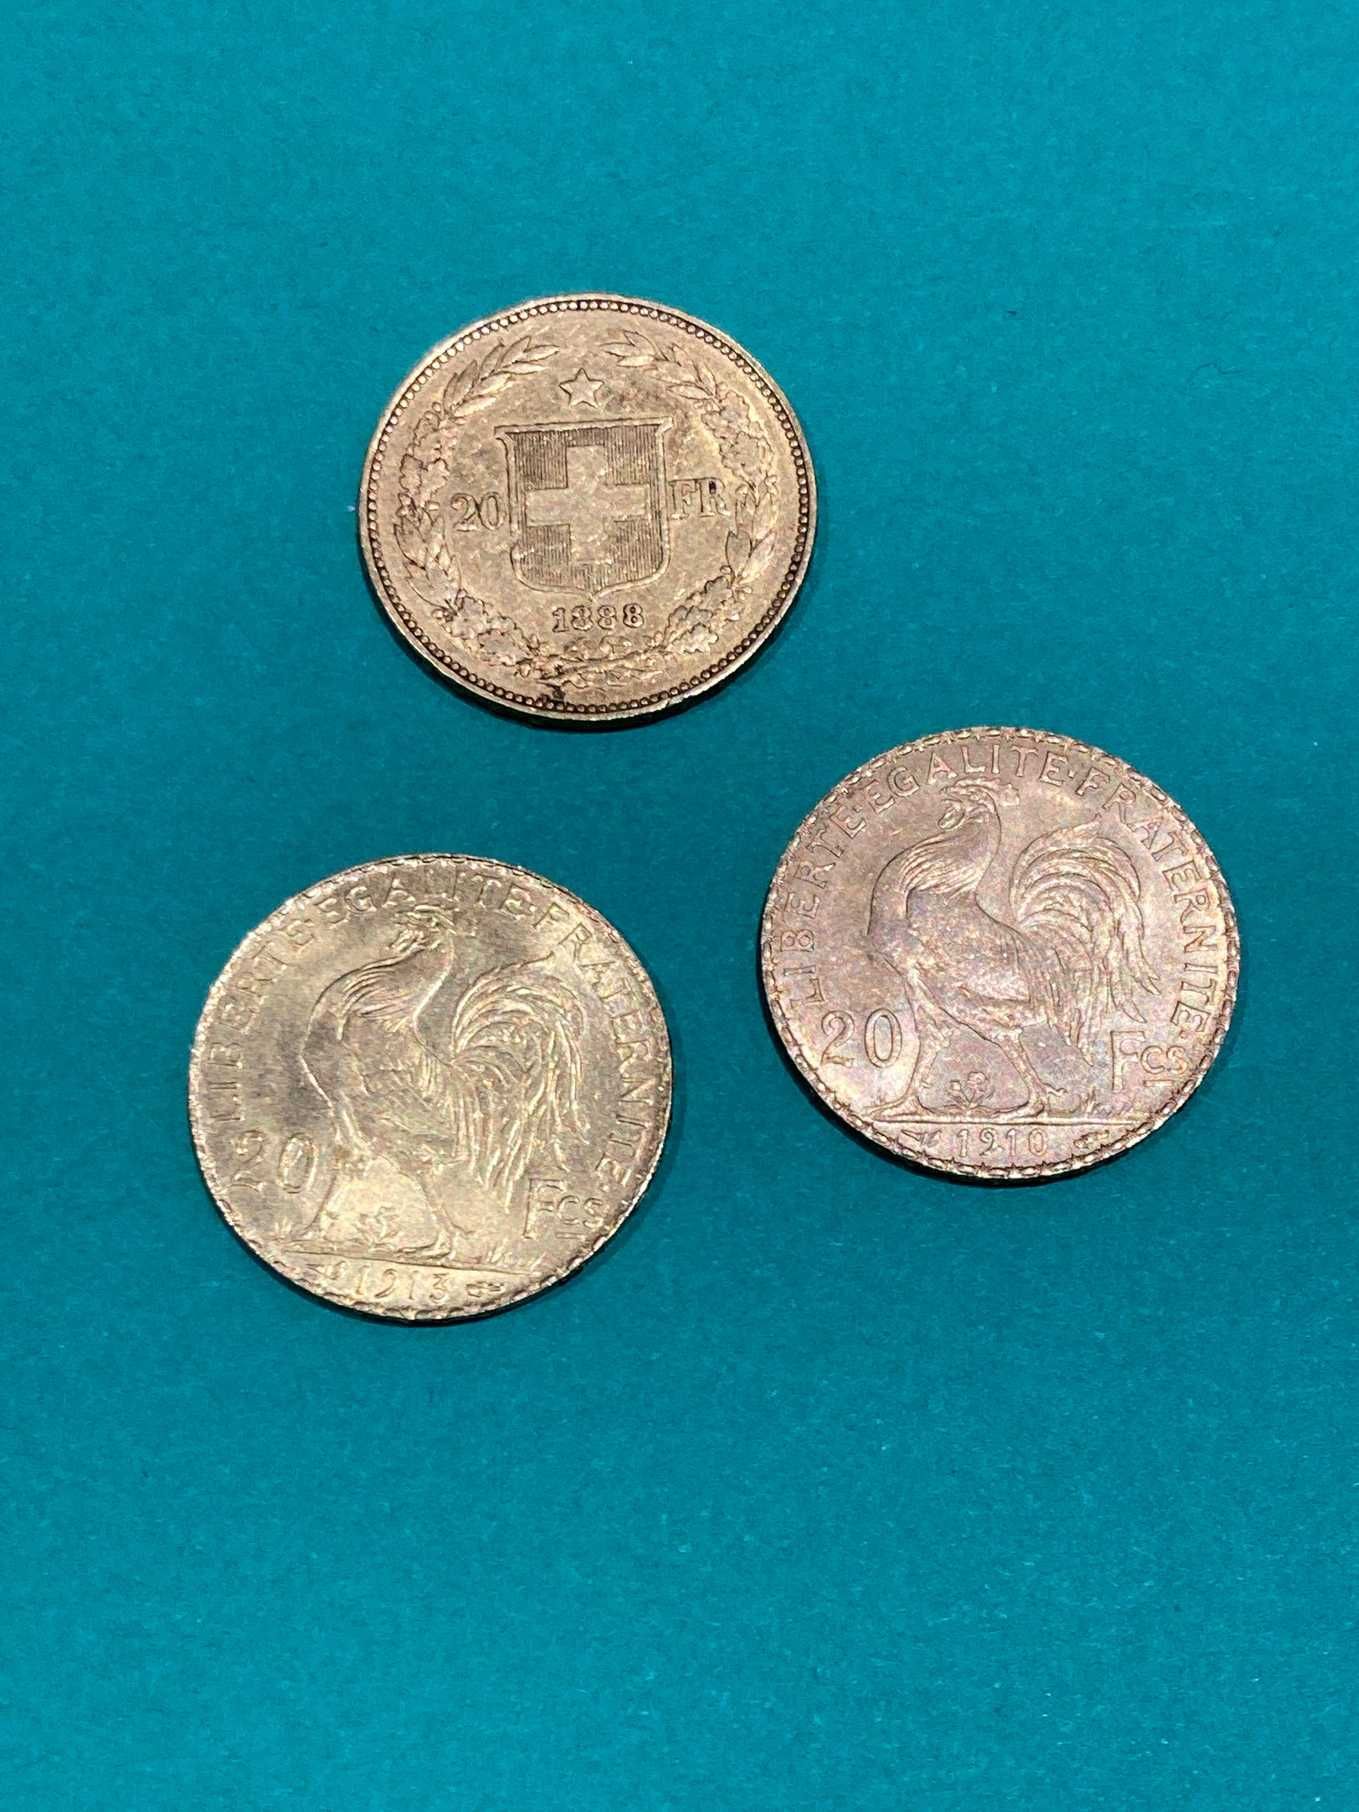 Null Lot of 3 coins 20fr gold (1910-1913 and 1883)